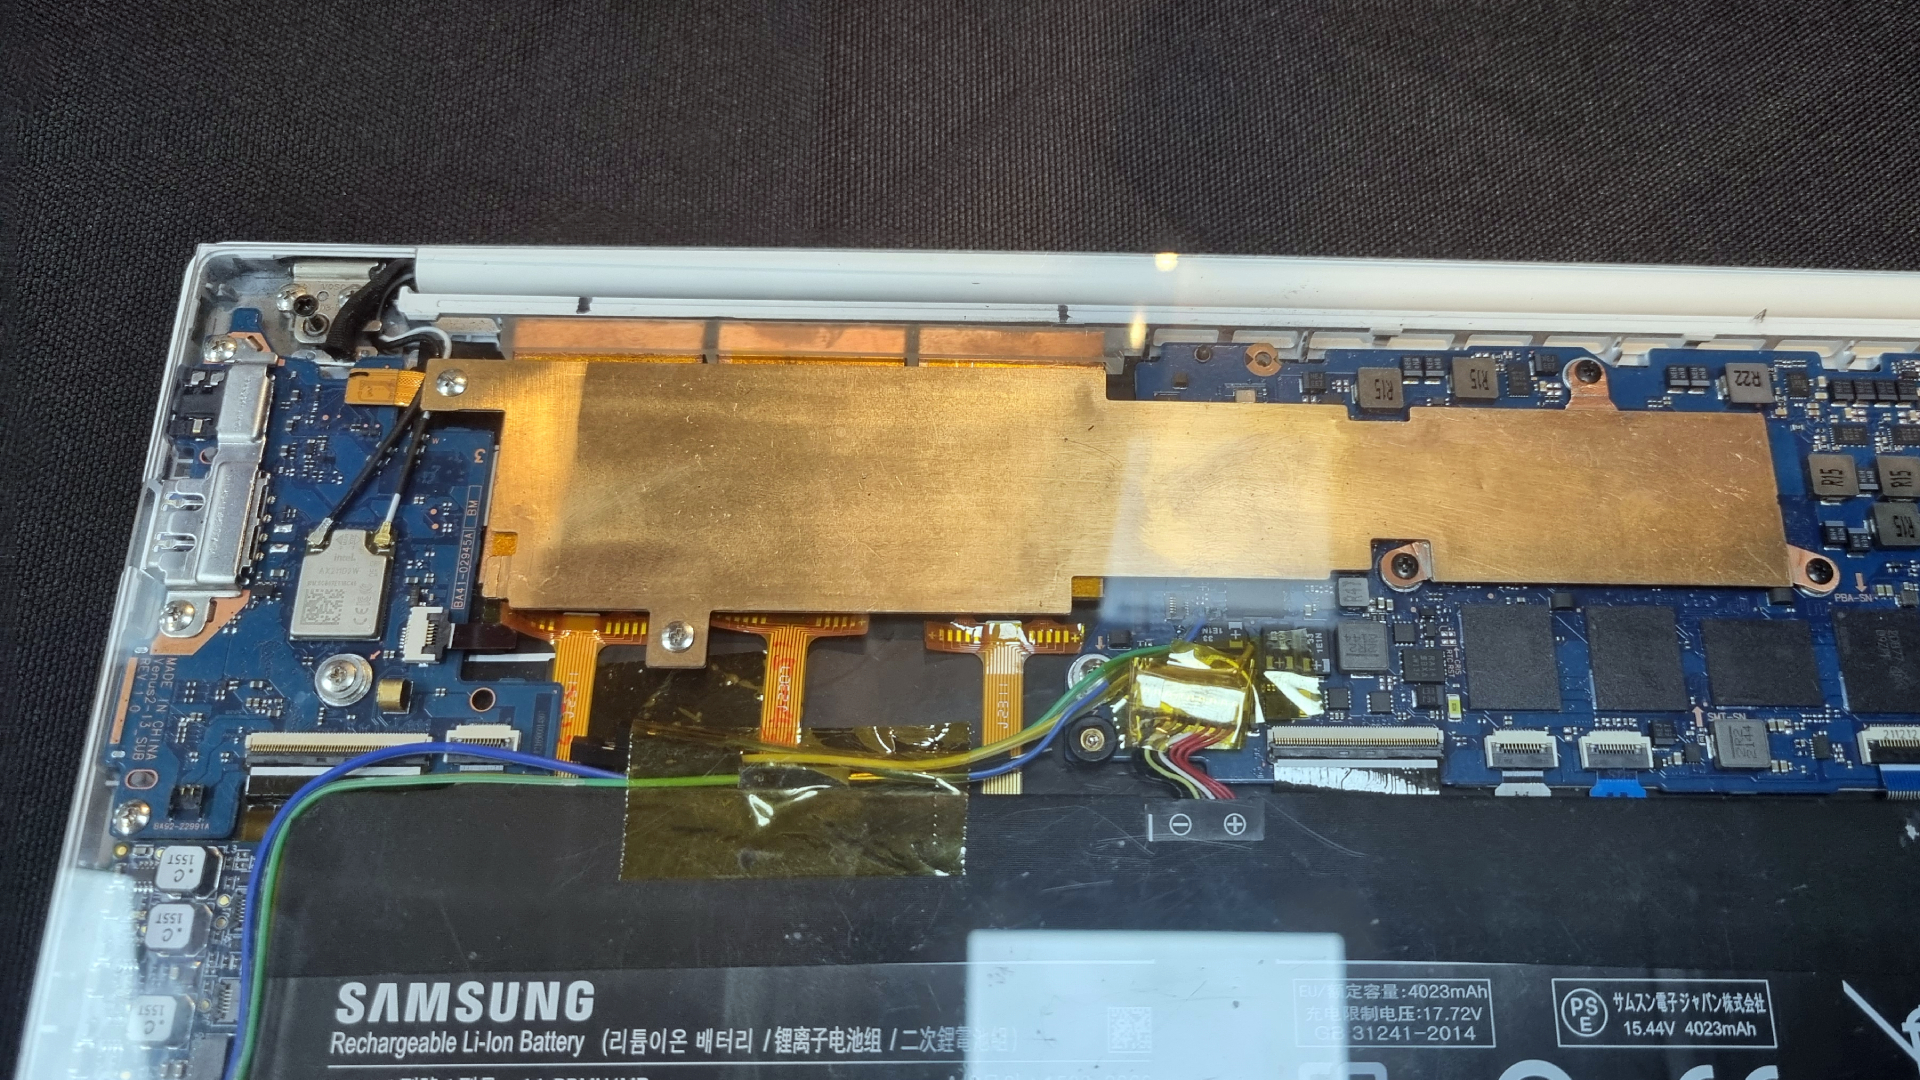 A Samsung laptop with a transparent panel, showing several Frore AirJet Mini Slims sitting underneath a copper plate